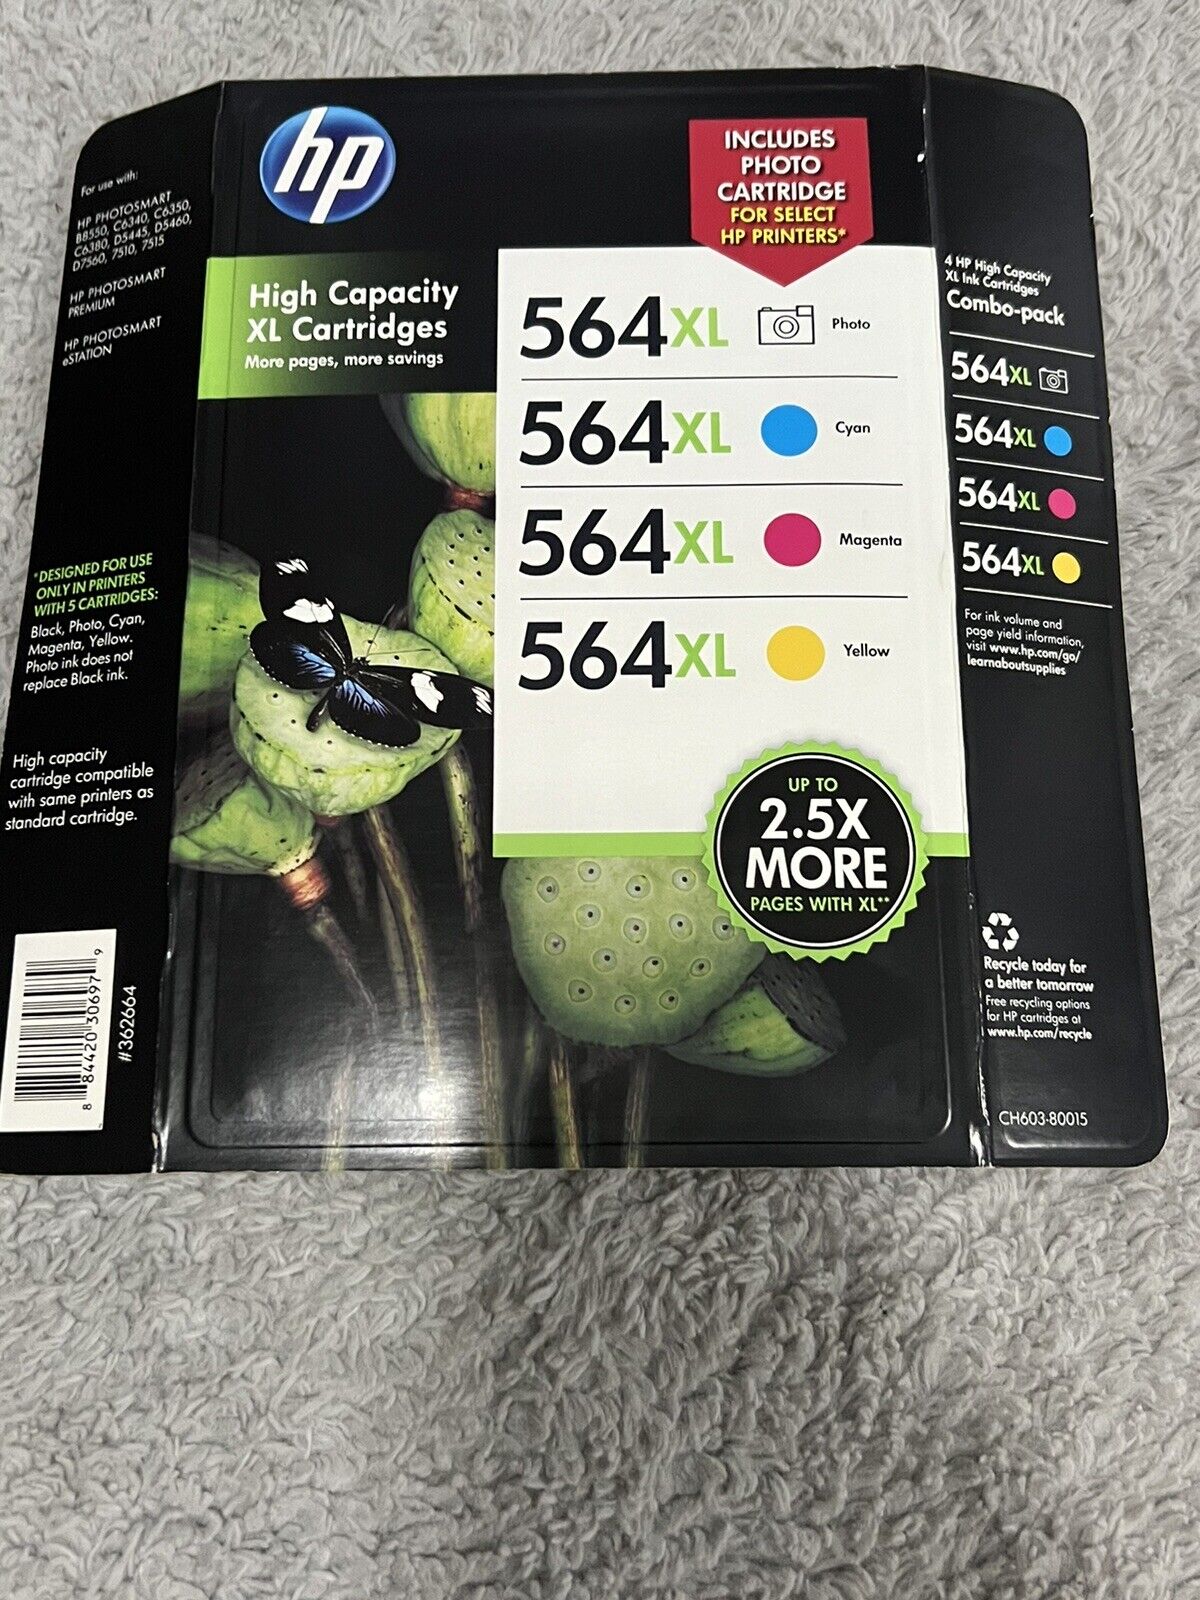 NEW SEALED Genuine HP 564xl CH603-80015 Combo Pack #4 Ink Cartridges Sep 2013